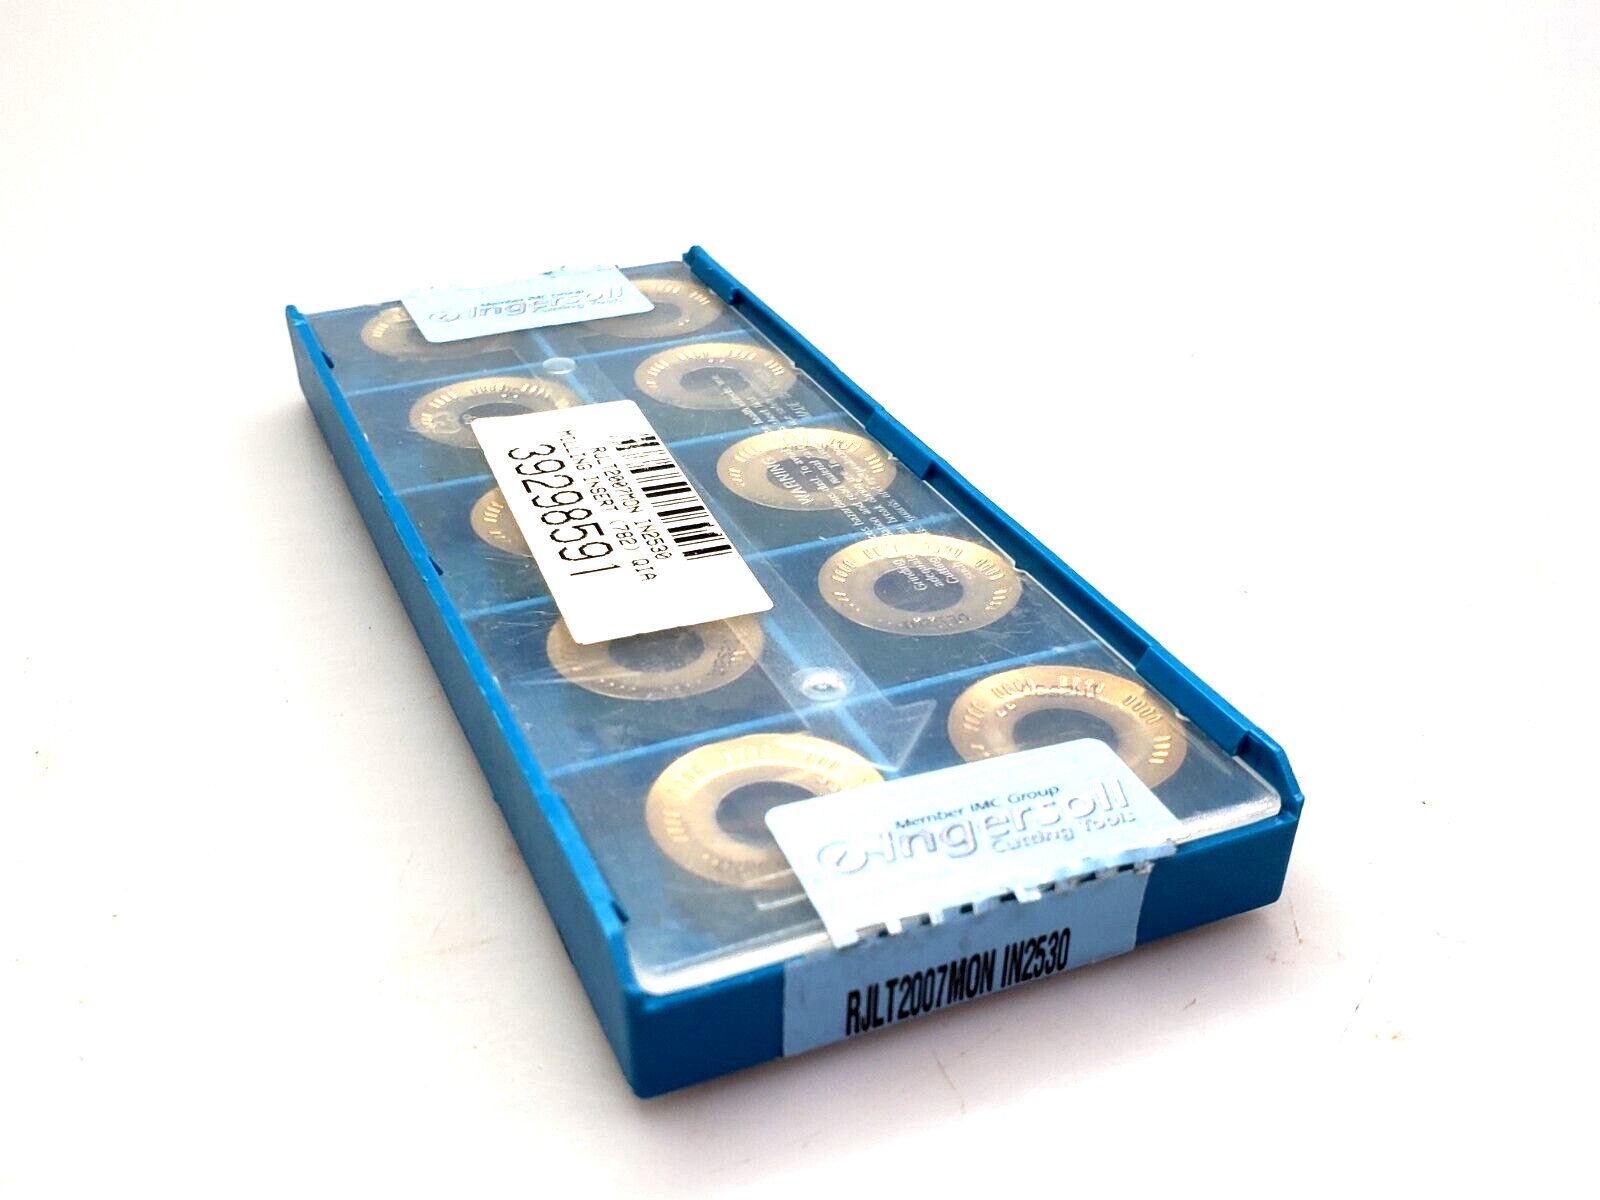 Ingersoll RJLT 2007MON IN2530 Carbide Milling Inserts (Box of 10)